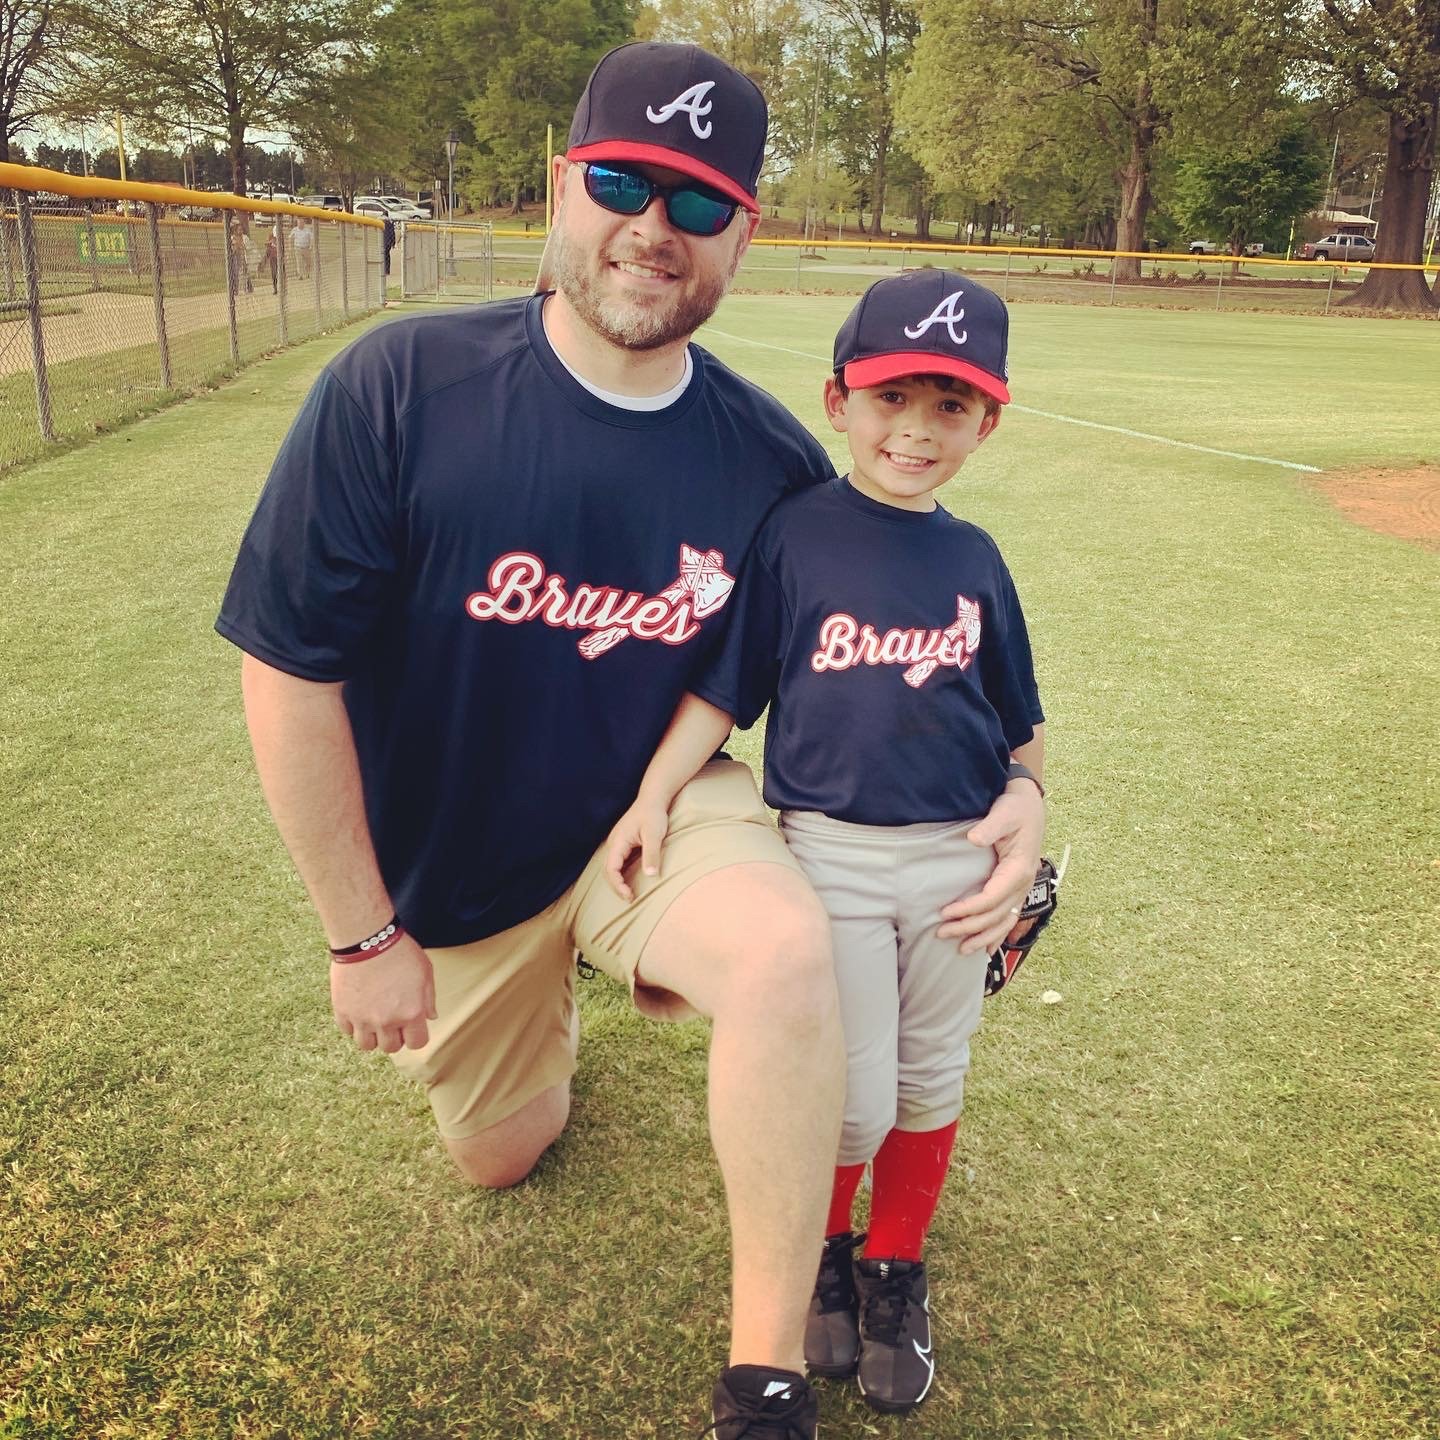 Austin Cooley of Madison poses with his son Jackson Cooley before a Madison Ridgeland Youth Club baseball league game.